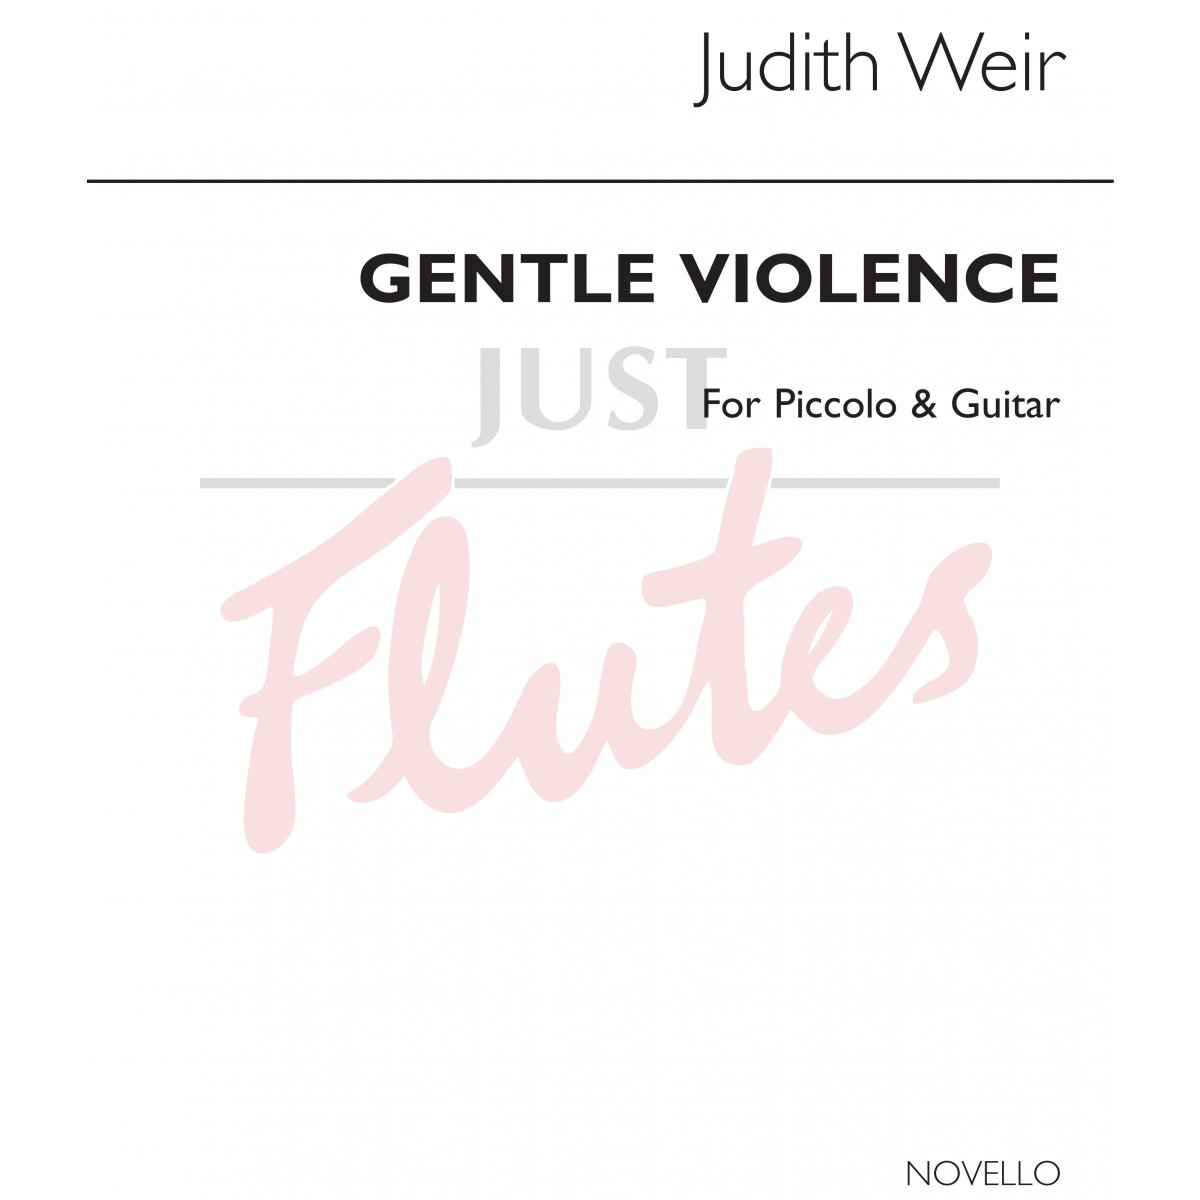 Gentle Violence for Piccolo and Guitar